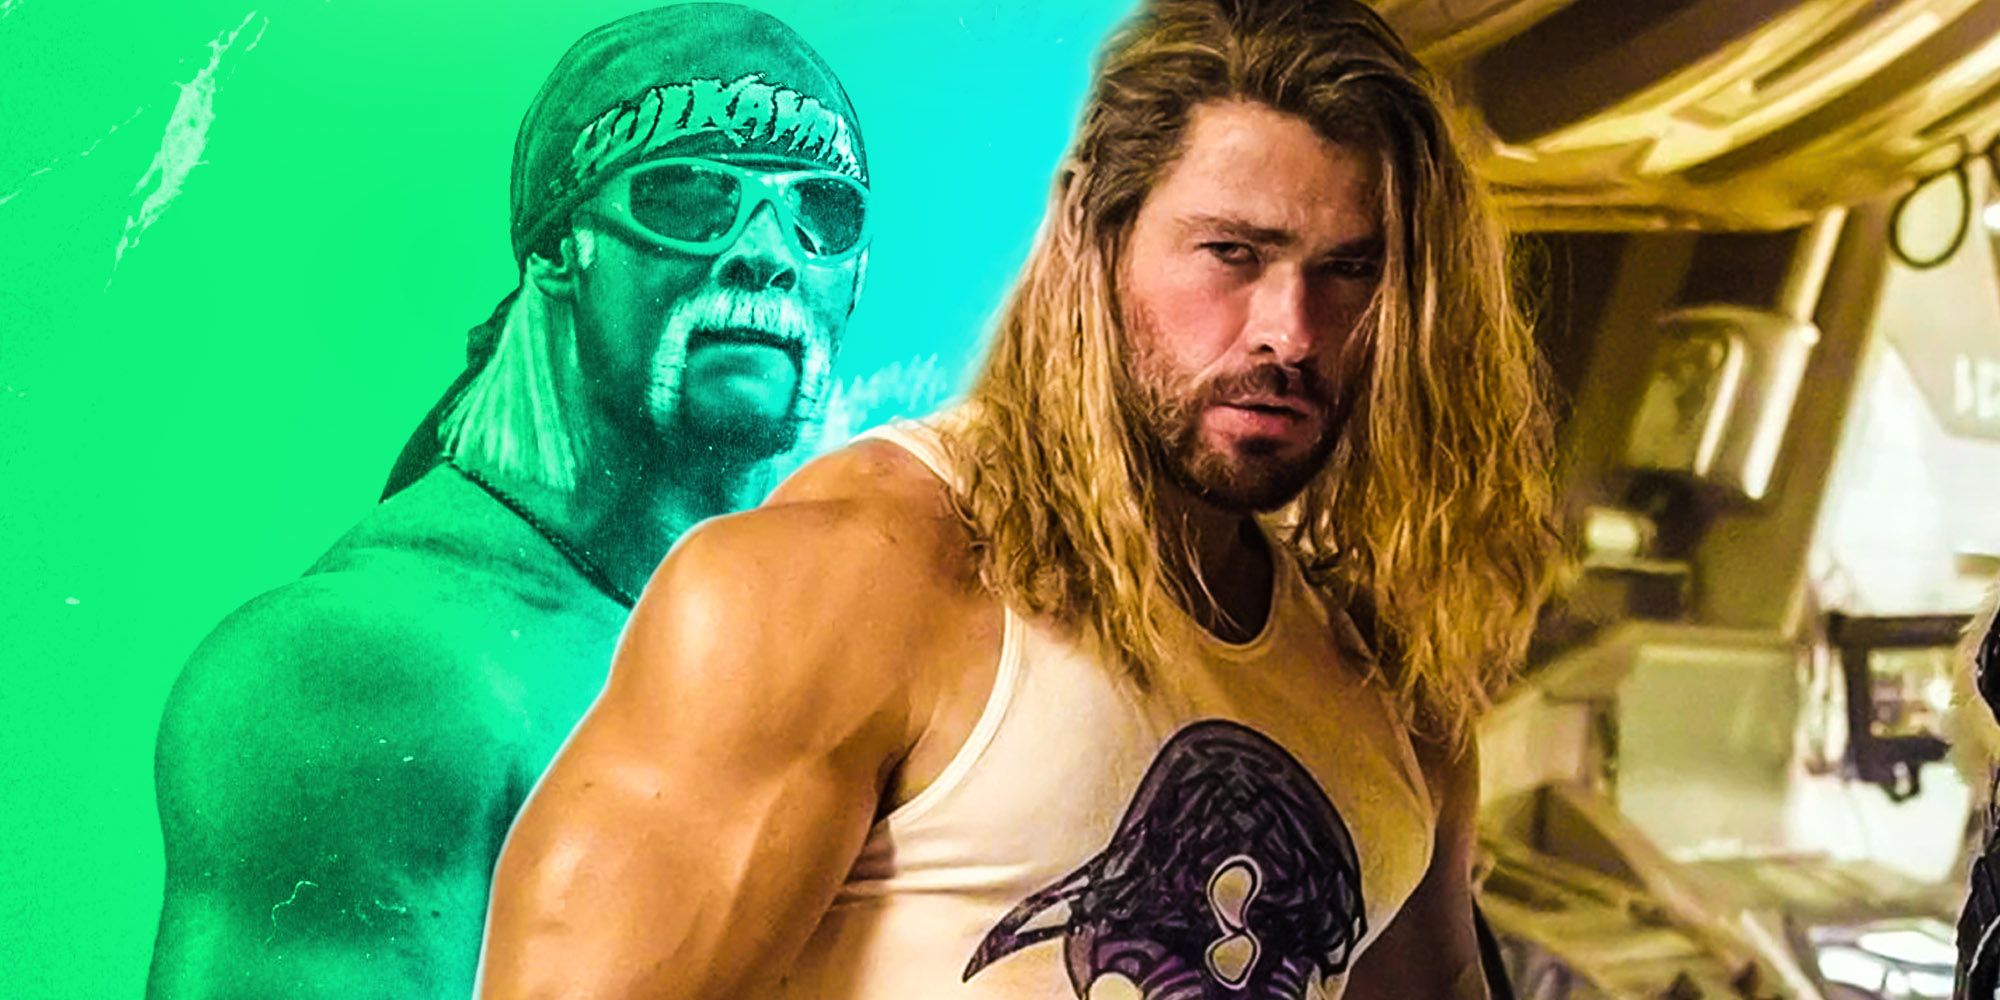 The Iron Claw Presents A Major Challenge For Chris Hemsworth S Hulk